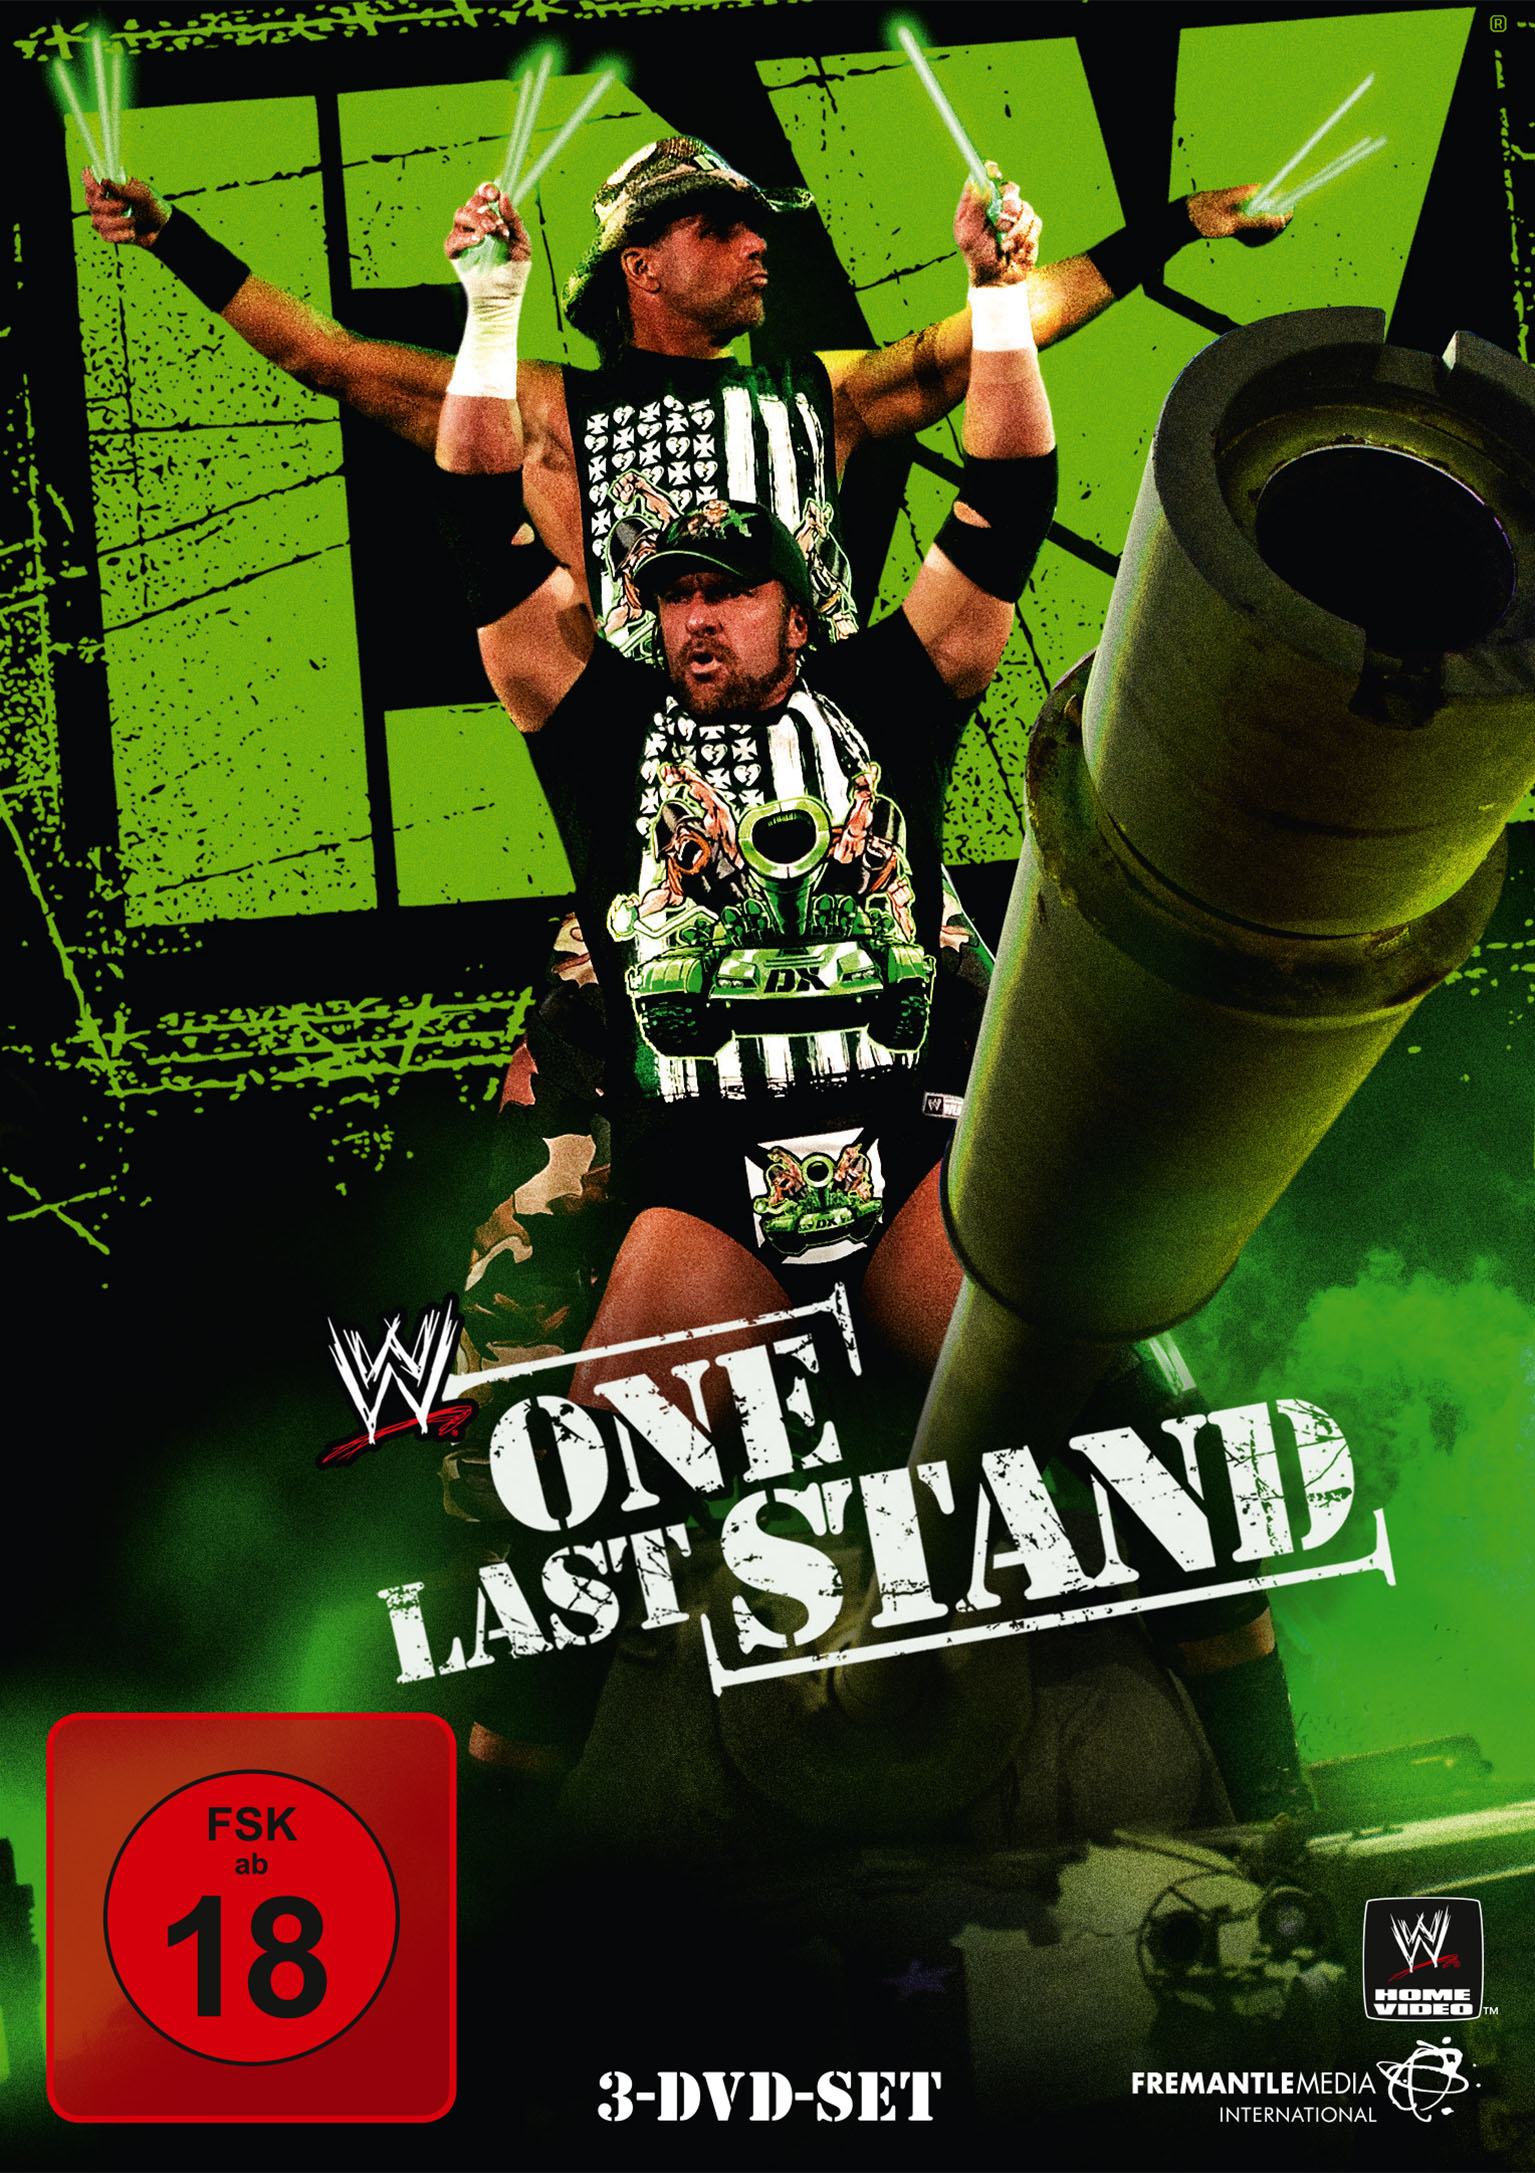 DX Stand DVD Last - One